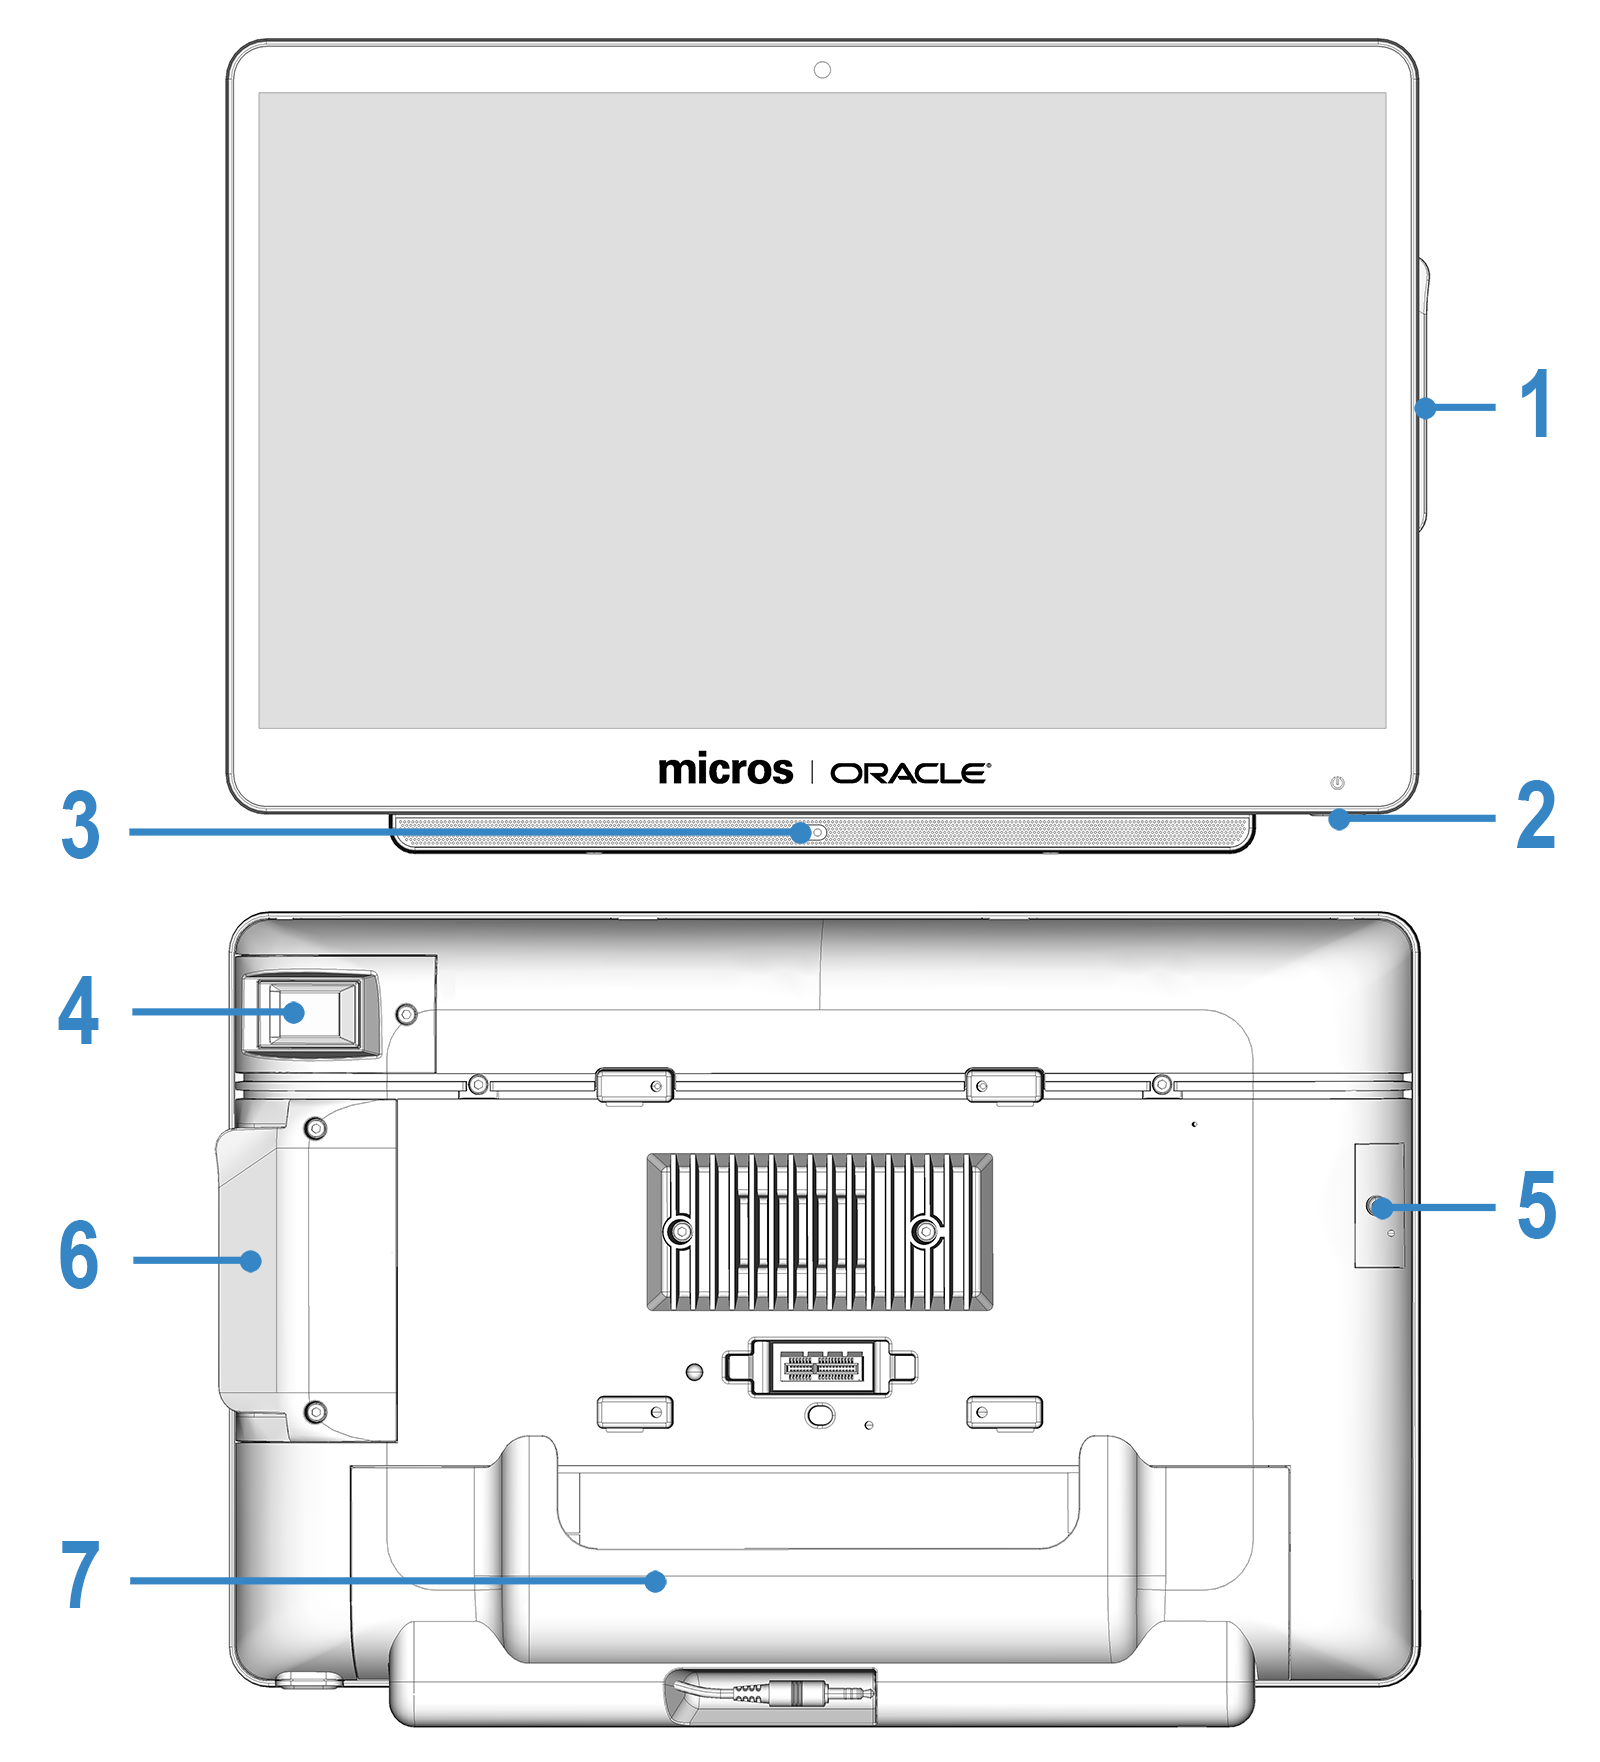 This figure shows the basic features of the Oracle MICROS Workstation 625/655.